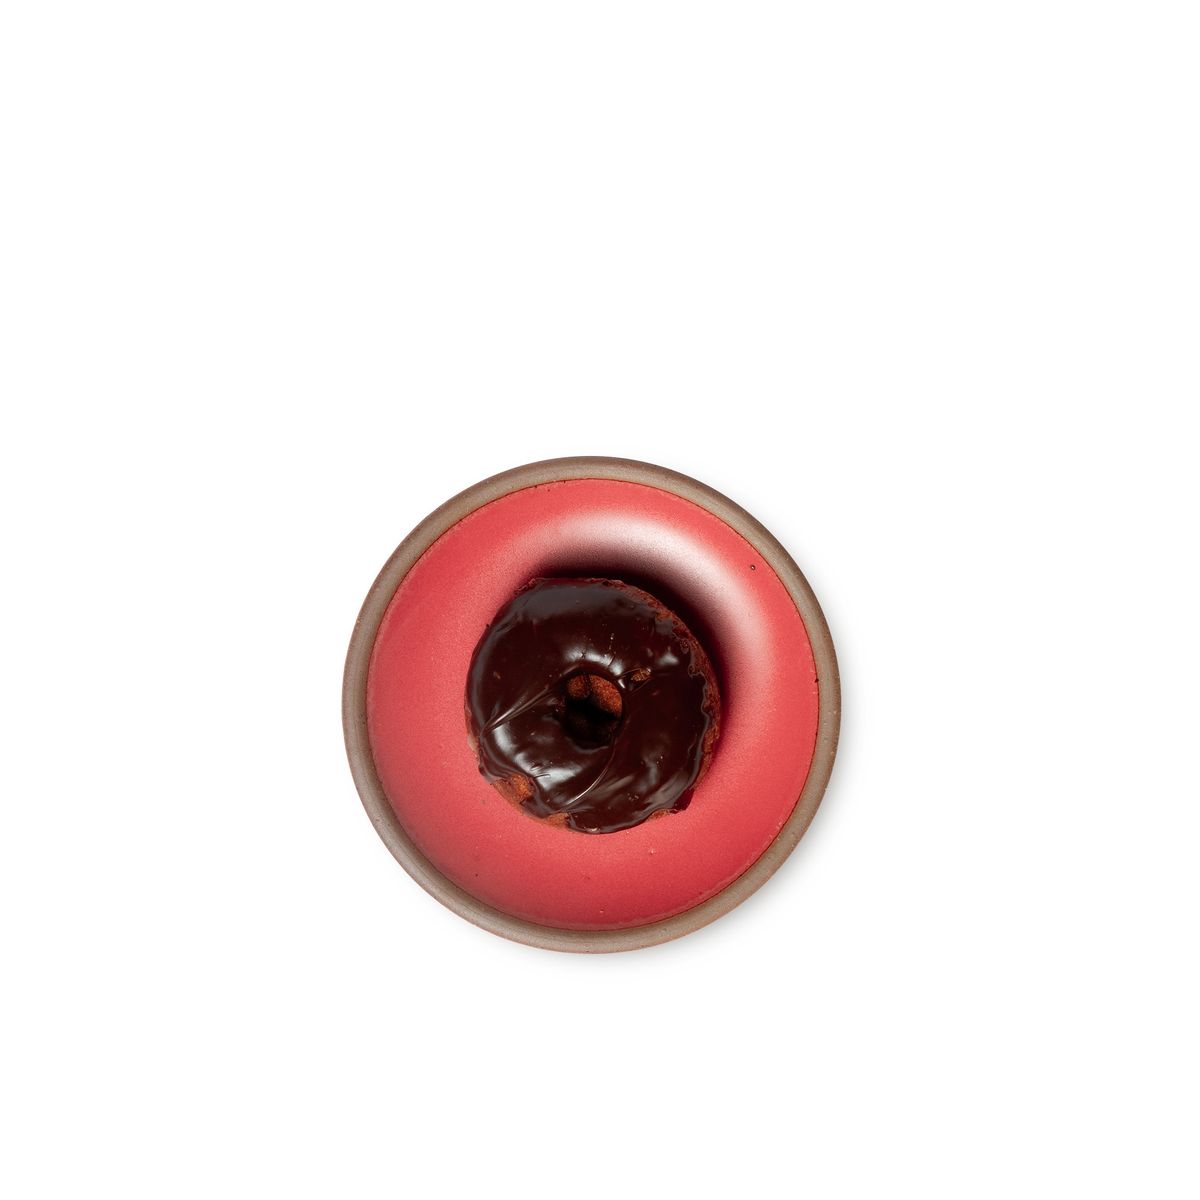 A chocolate donut sits on a dessert sized ceramic plate in a bold red color featuring iron speckles and an unglazed rim